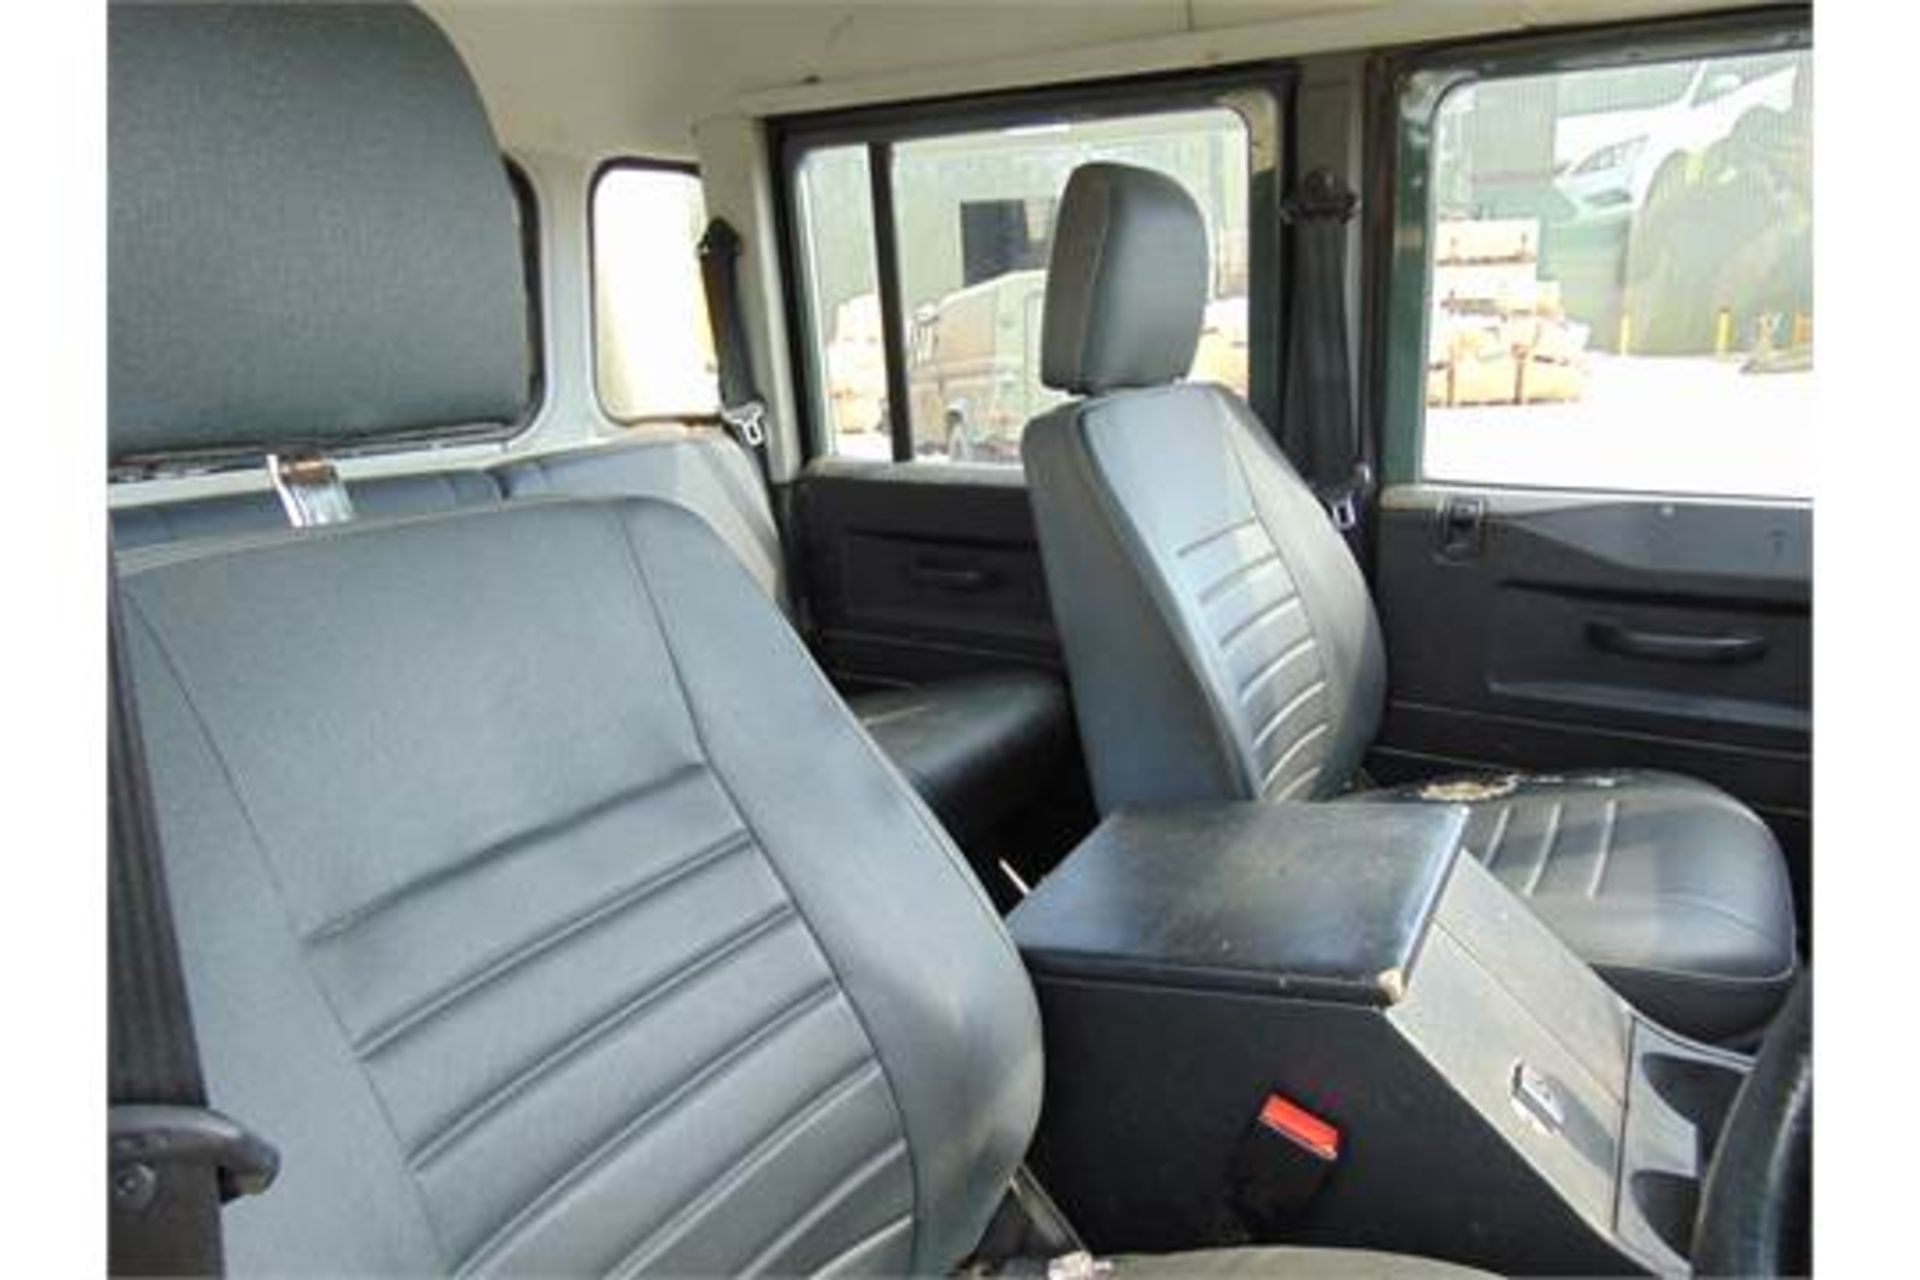 Land Rover Defender 130 TD5 Double Cab Pick Up - Image 12 of 17